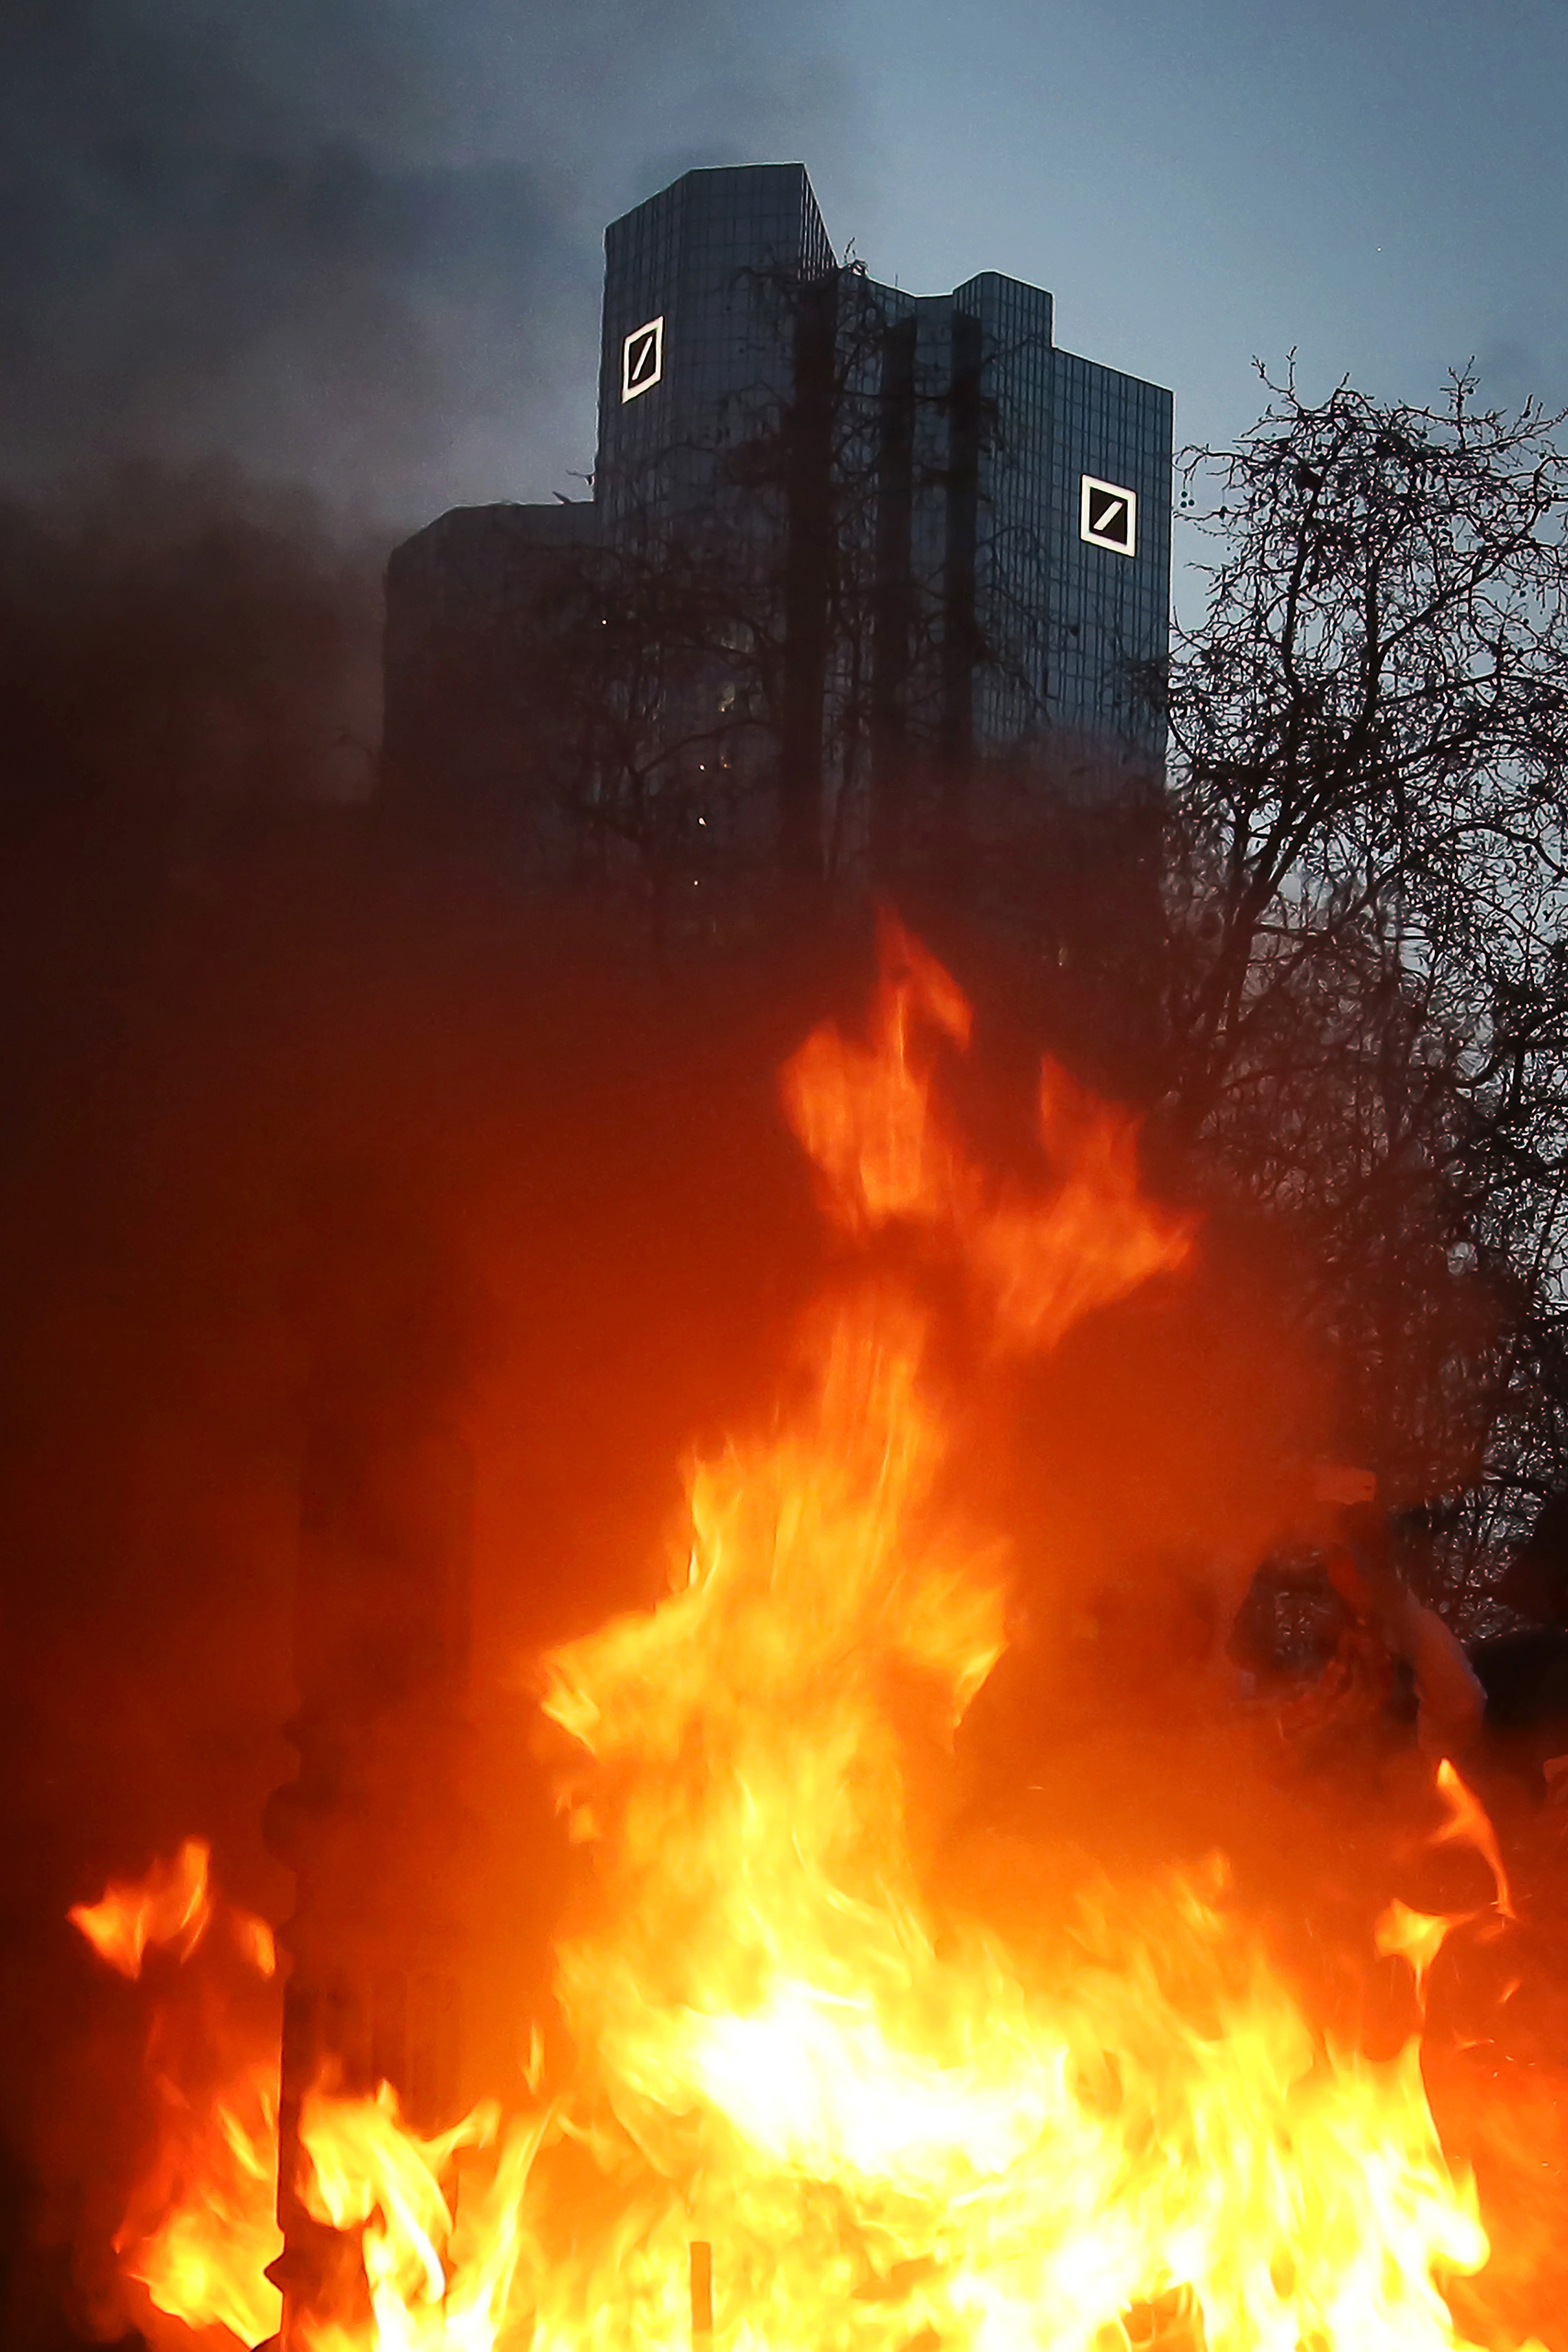 Protesters set fire to a pile of fake bills in front of the towers of the Deutsche Bank, while gathering for the closing rally on the Opernplatz (Opera Square) in Frankfurt, Germany, 18 March 2015. The new headquarters of the European Central Bank (ECB) in Frankfurt opened today amid protests. Photo by: Fredrik von Erichsen/picture-alliance/dpa/AP Images (Fredrik von Erichsen)